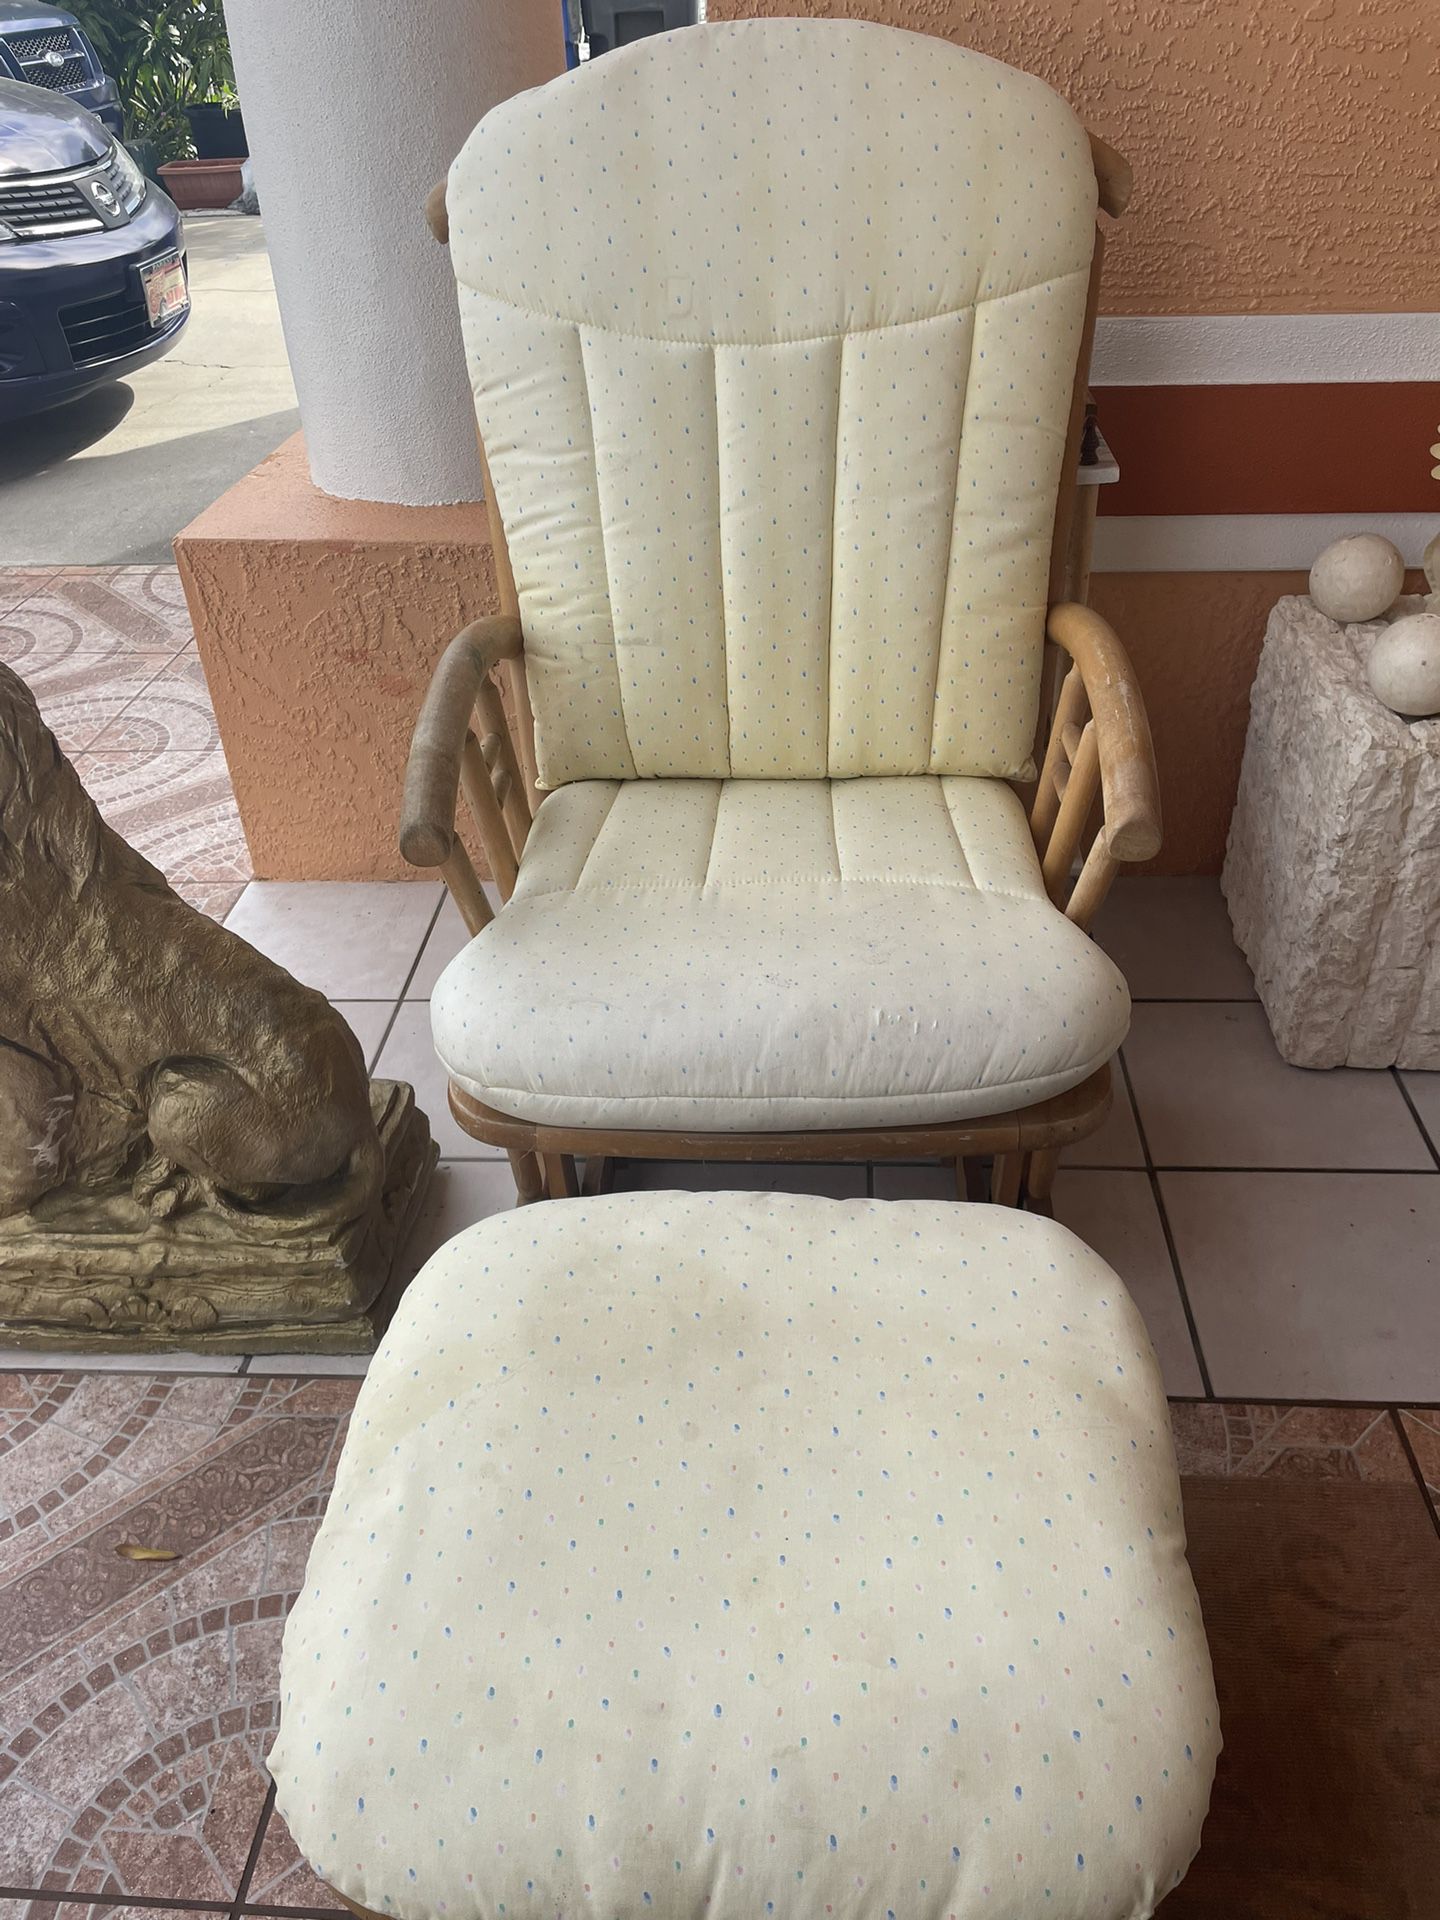 clean, wide and comfortable rocking chair with a paint that looks new with its bench to put your feet on